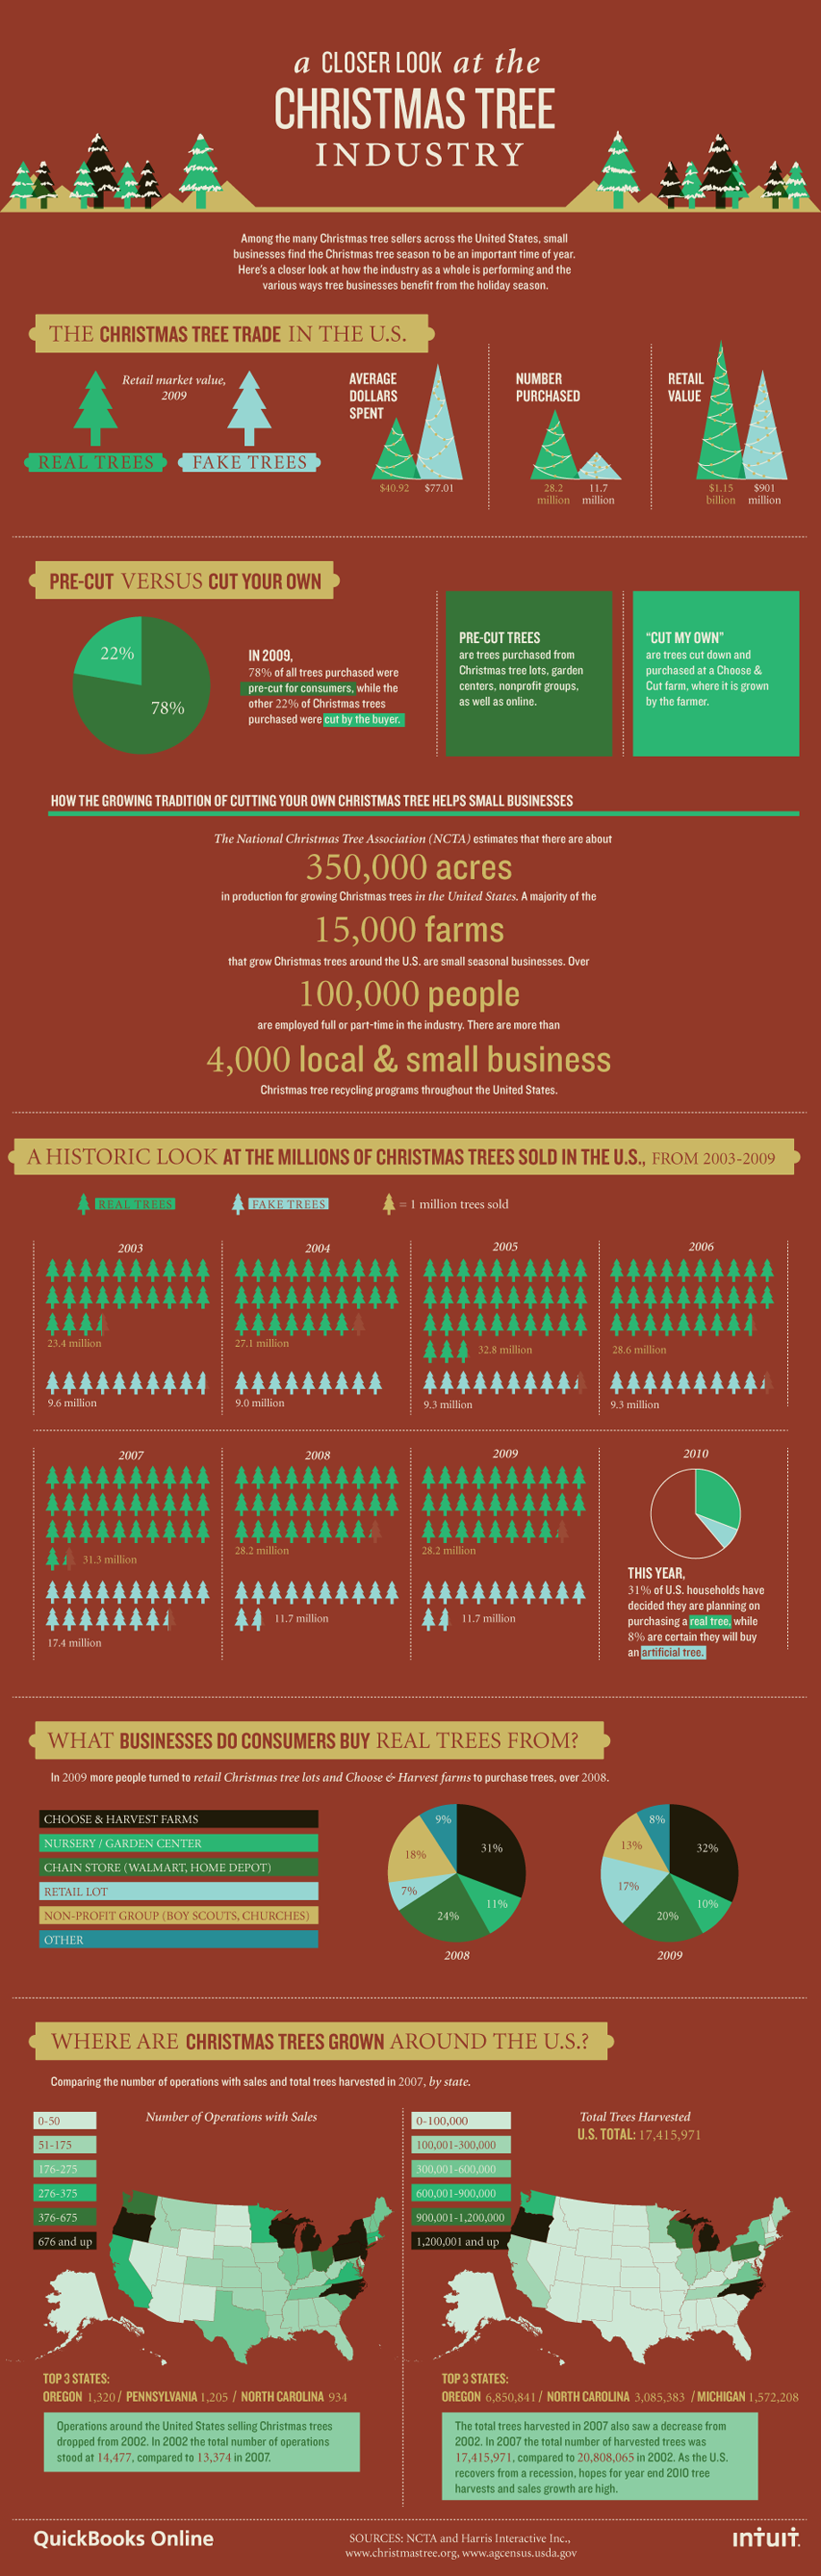 A Closer Look at the Christmas Tree Industry